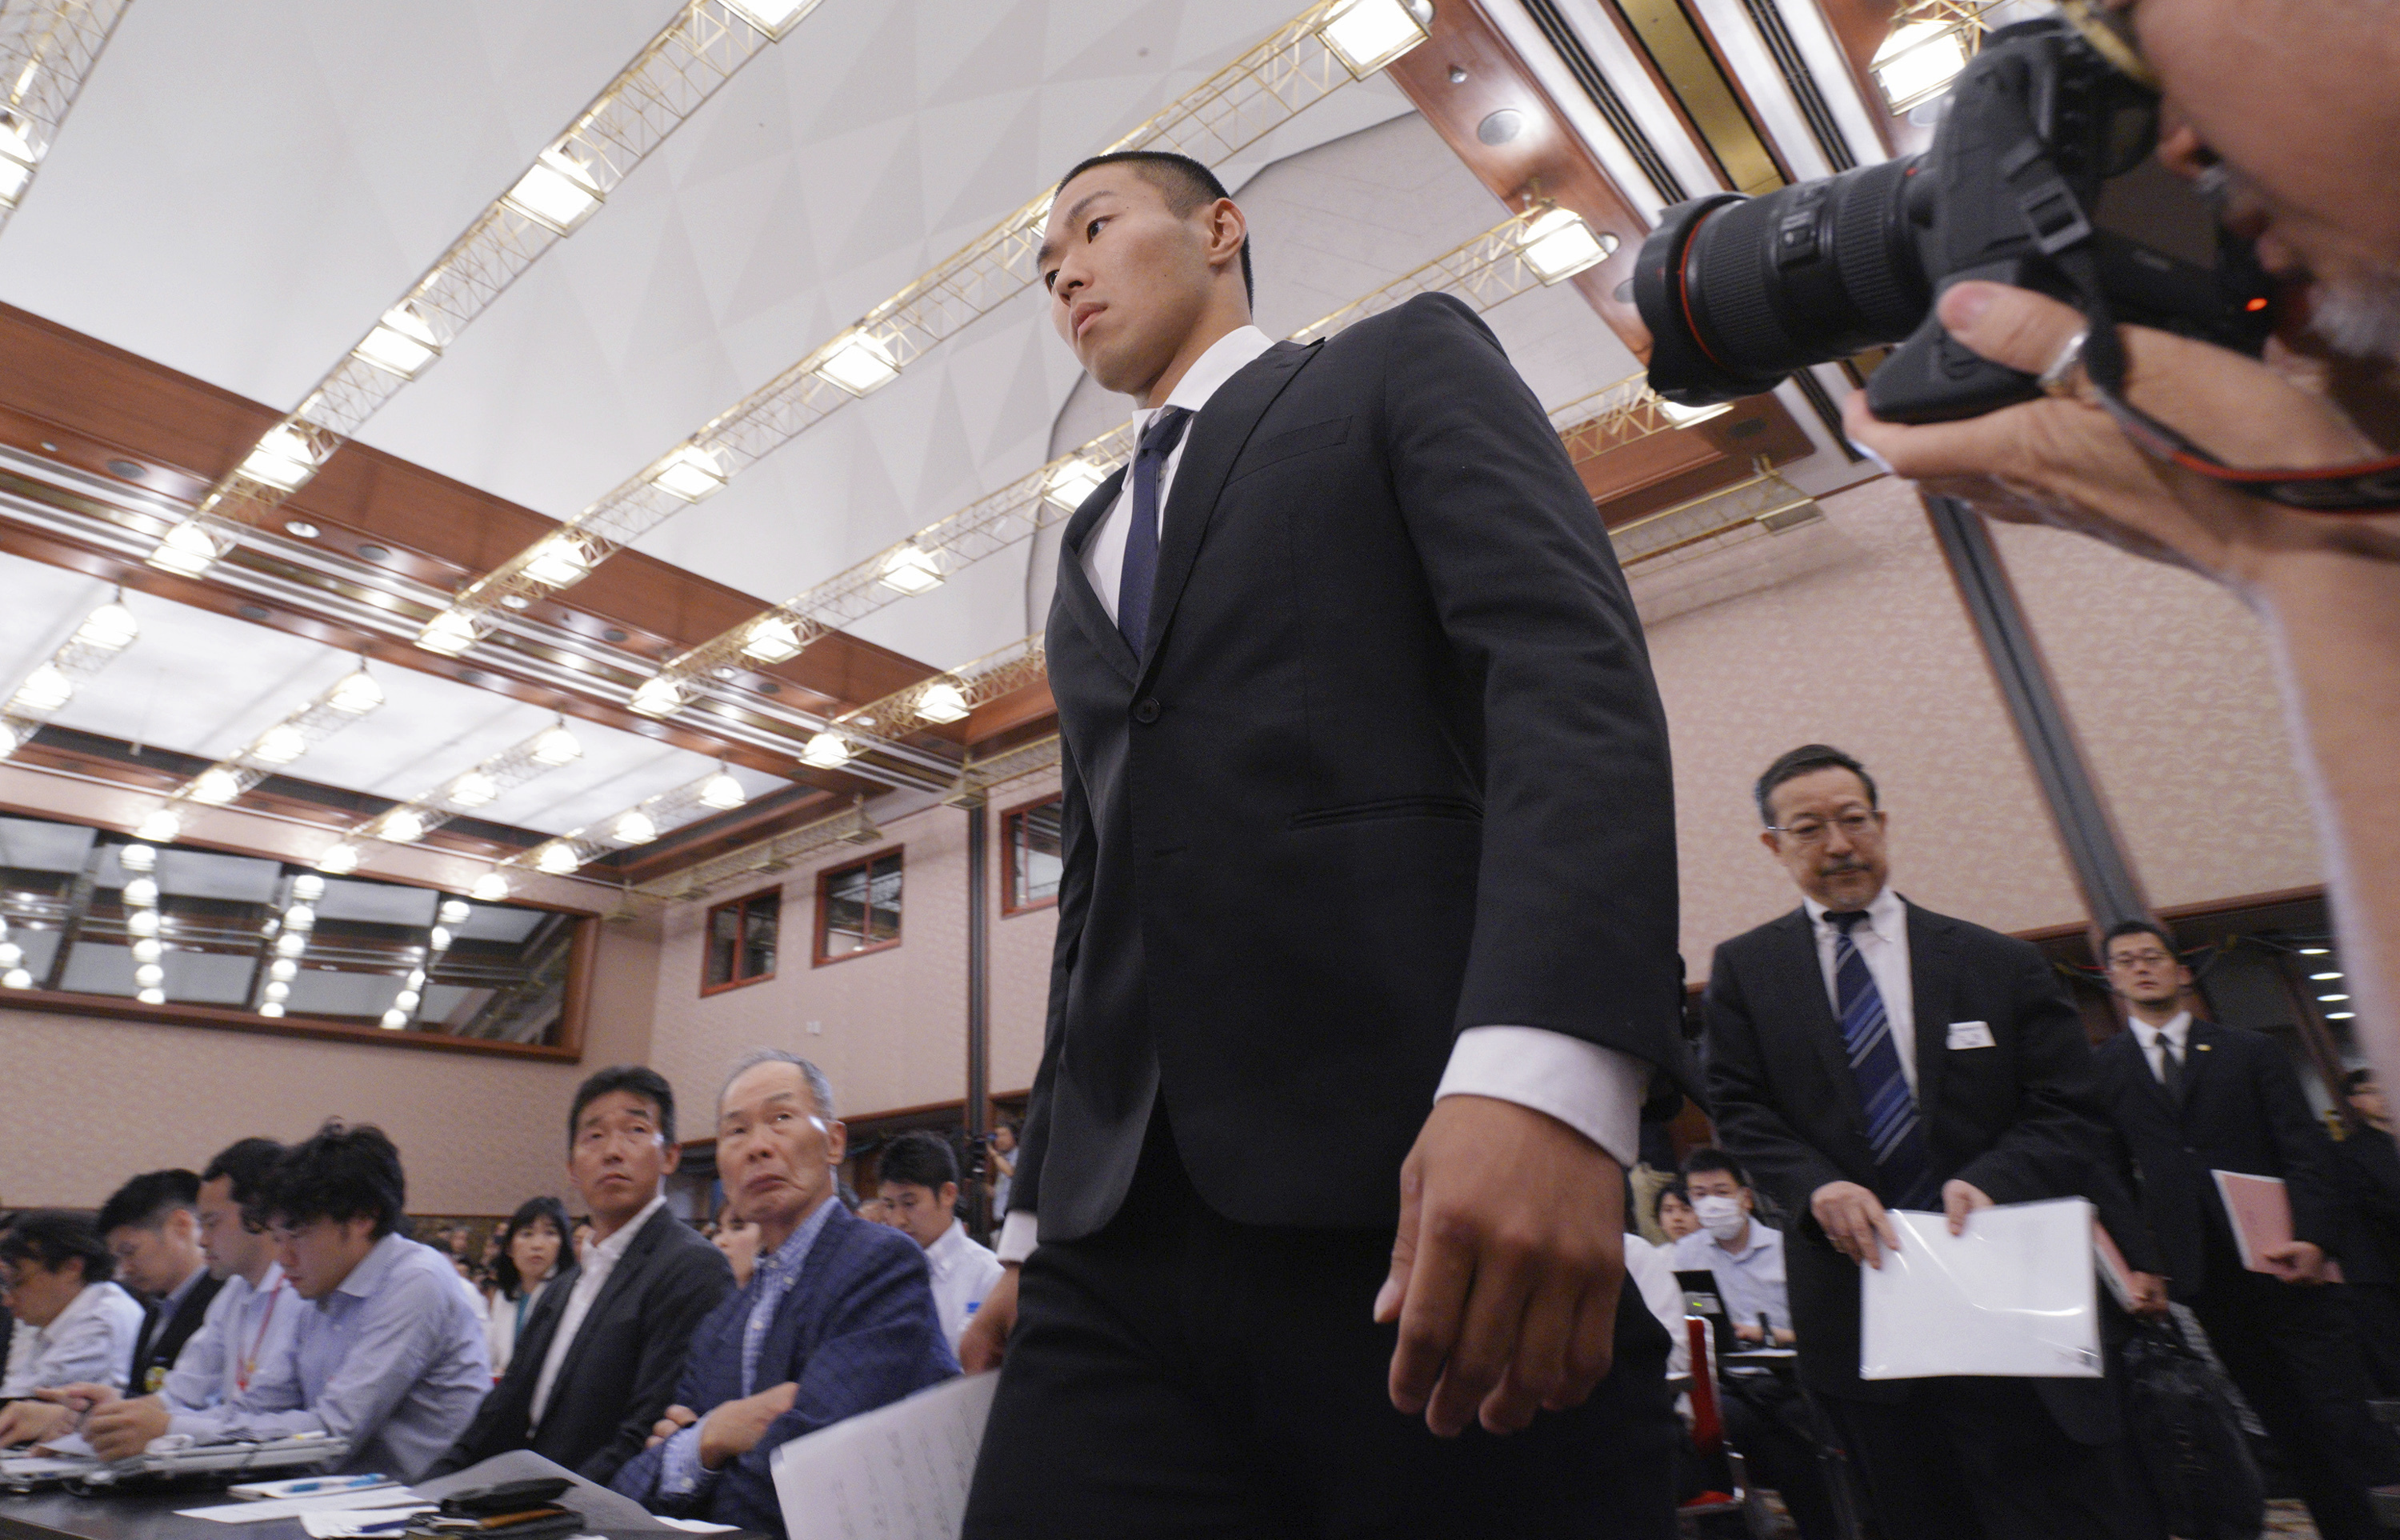 Taisuke Miyagawa, a Nihon University American football player, arrives for a news conference on Tuesday in Tokyo. | AP